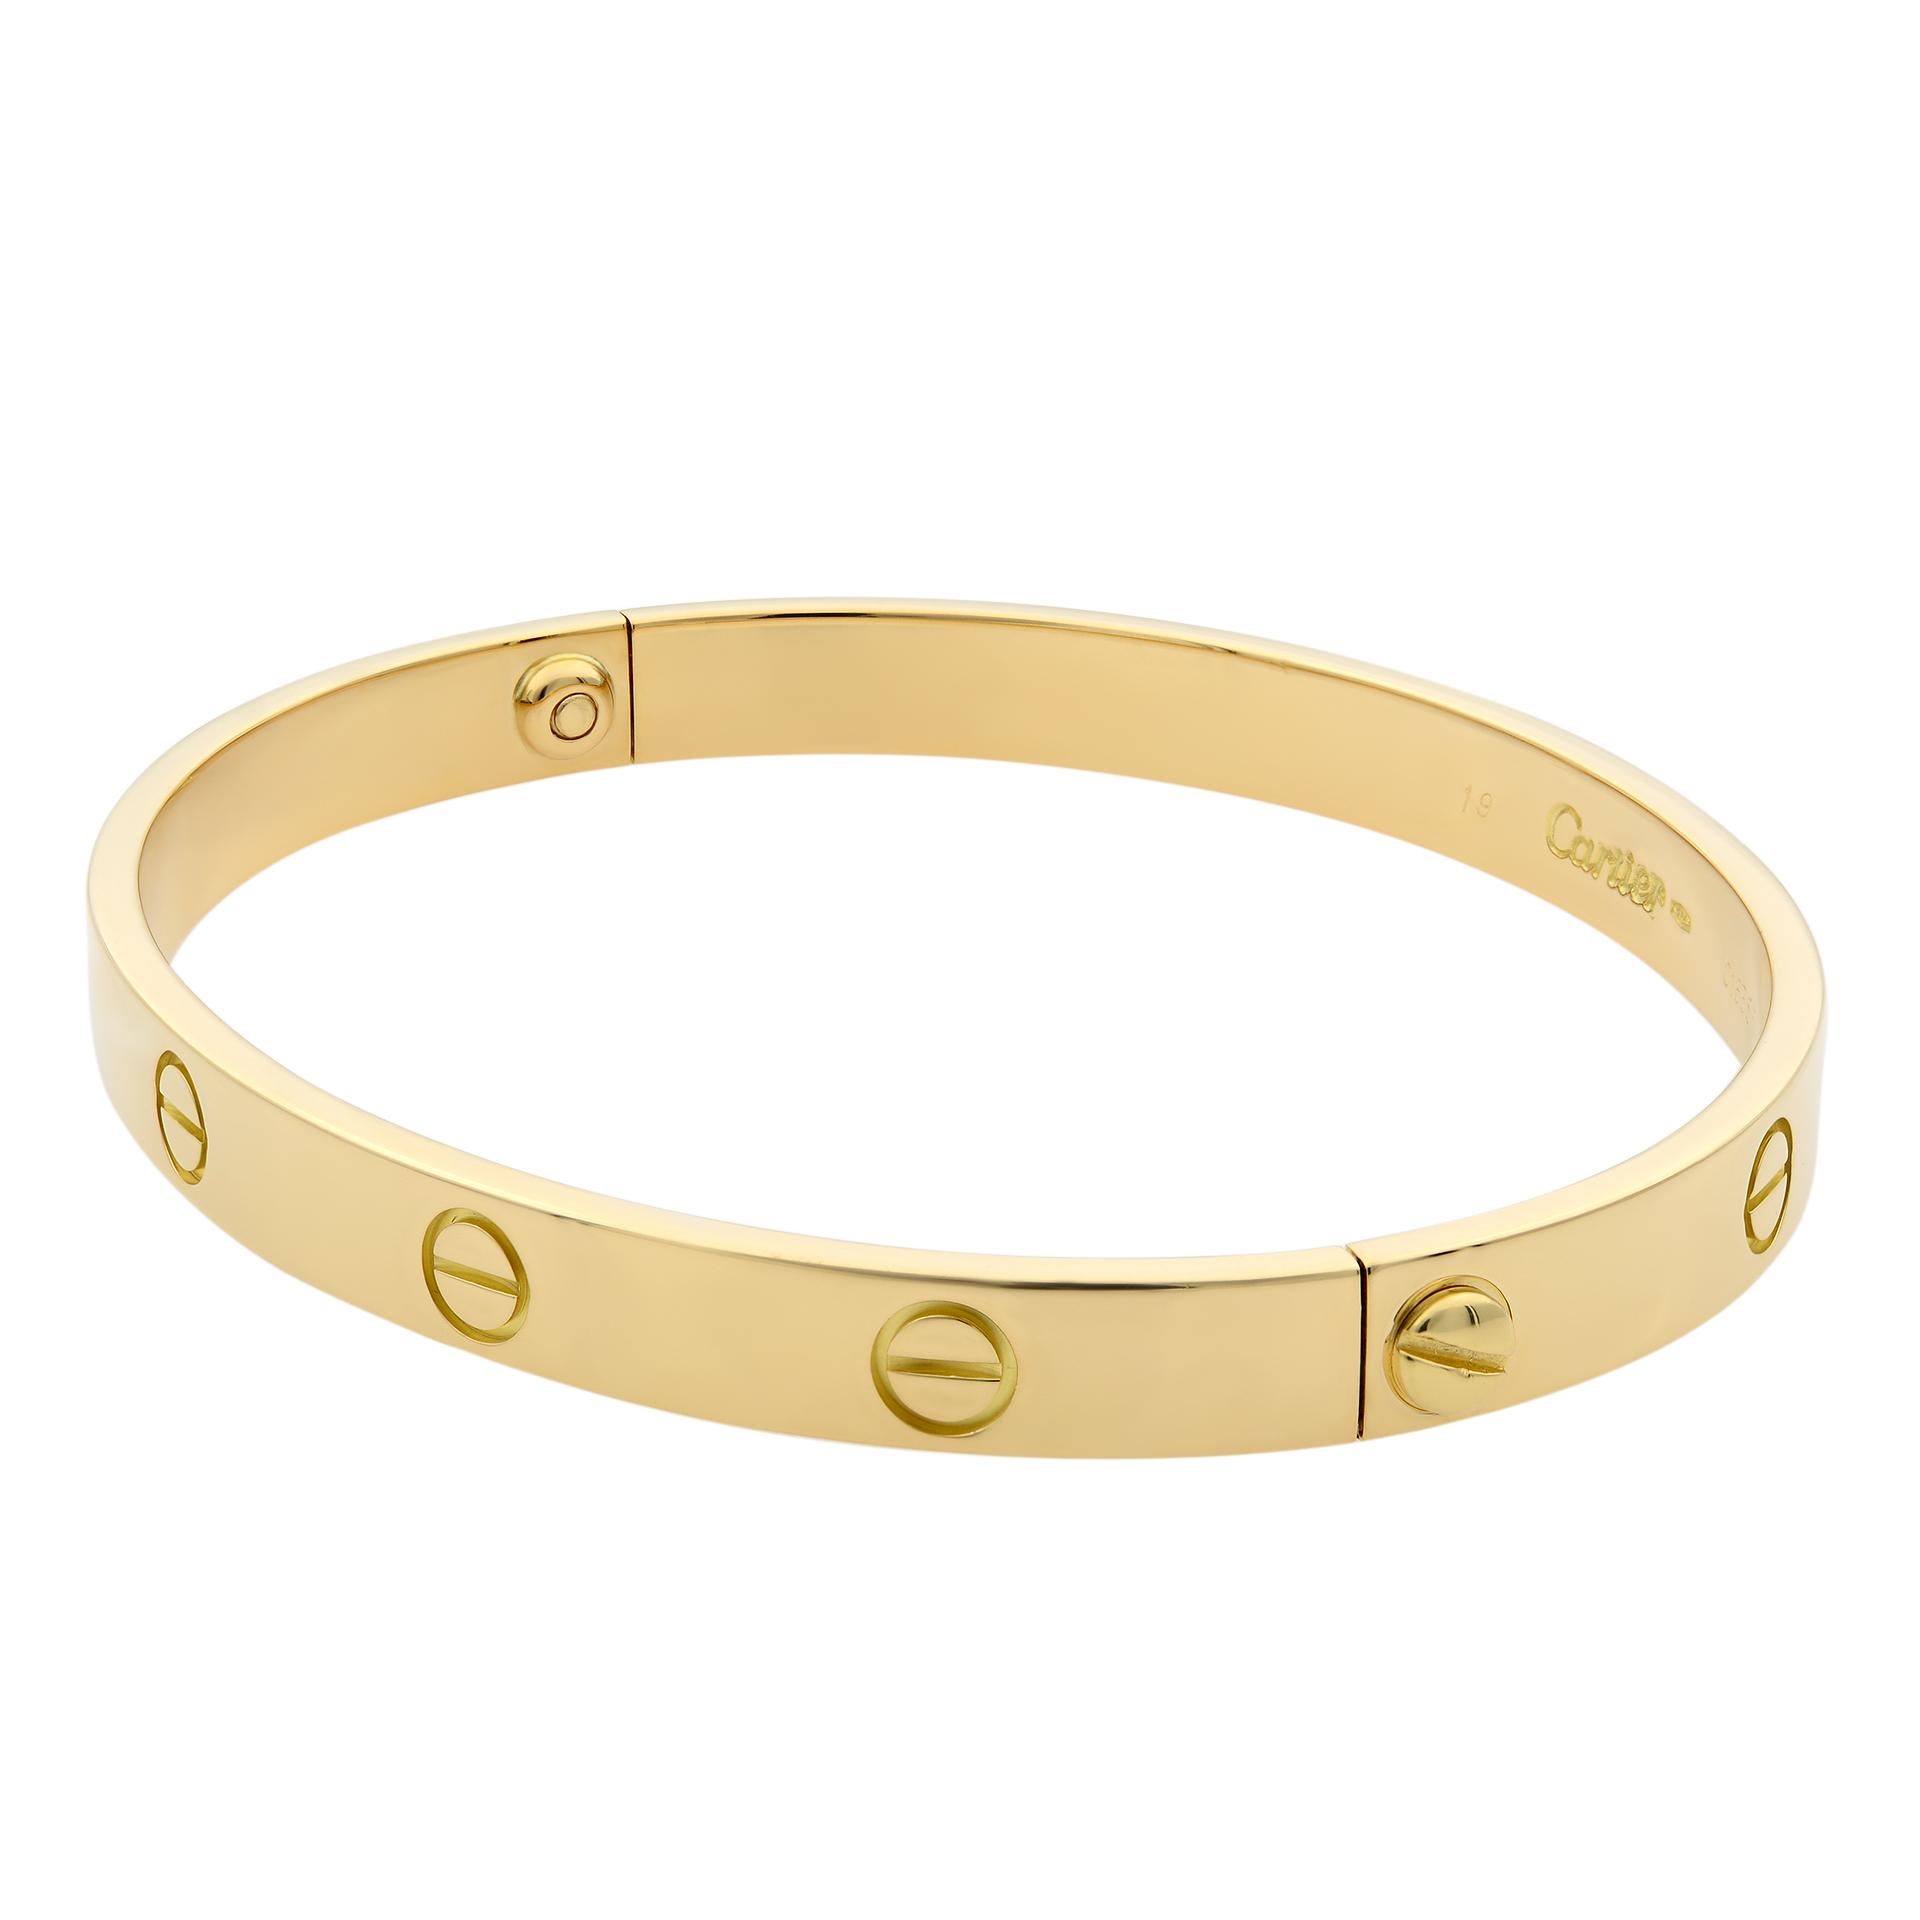 Cartier Love bracelet, 18K yellow gold. Old screw system. Width: 6.1mm.  Size 19.
Condition: pre-owned, looks great. Comes with a screw driver. Box and papers are not included. 